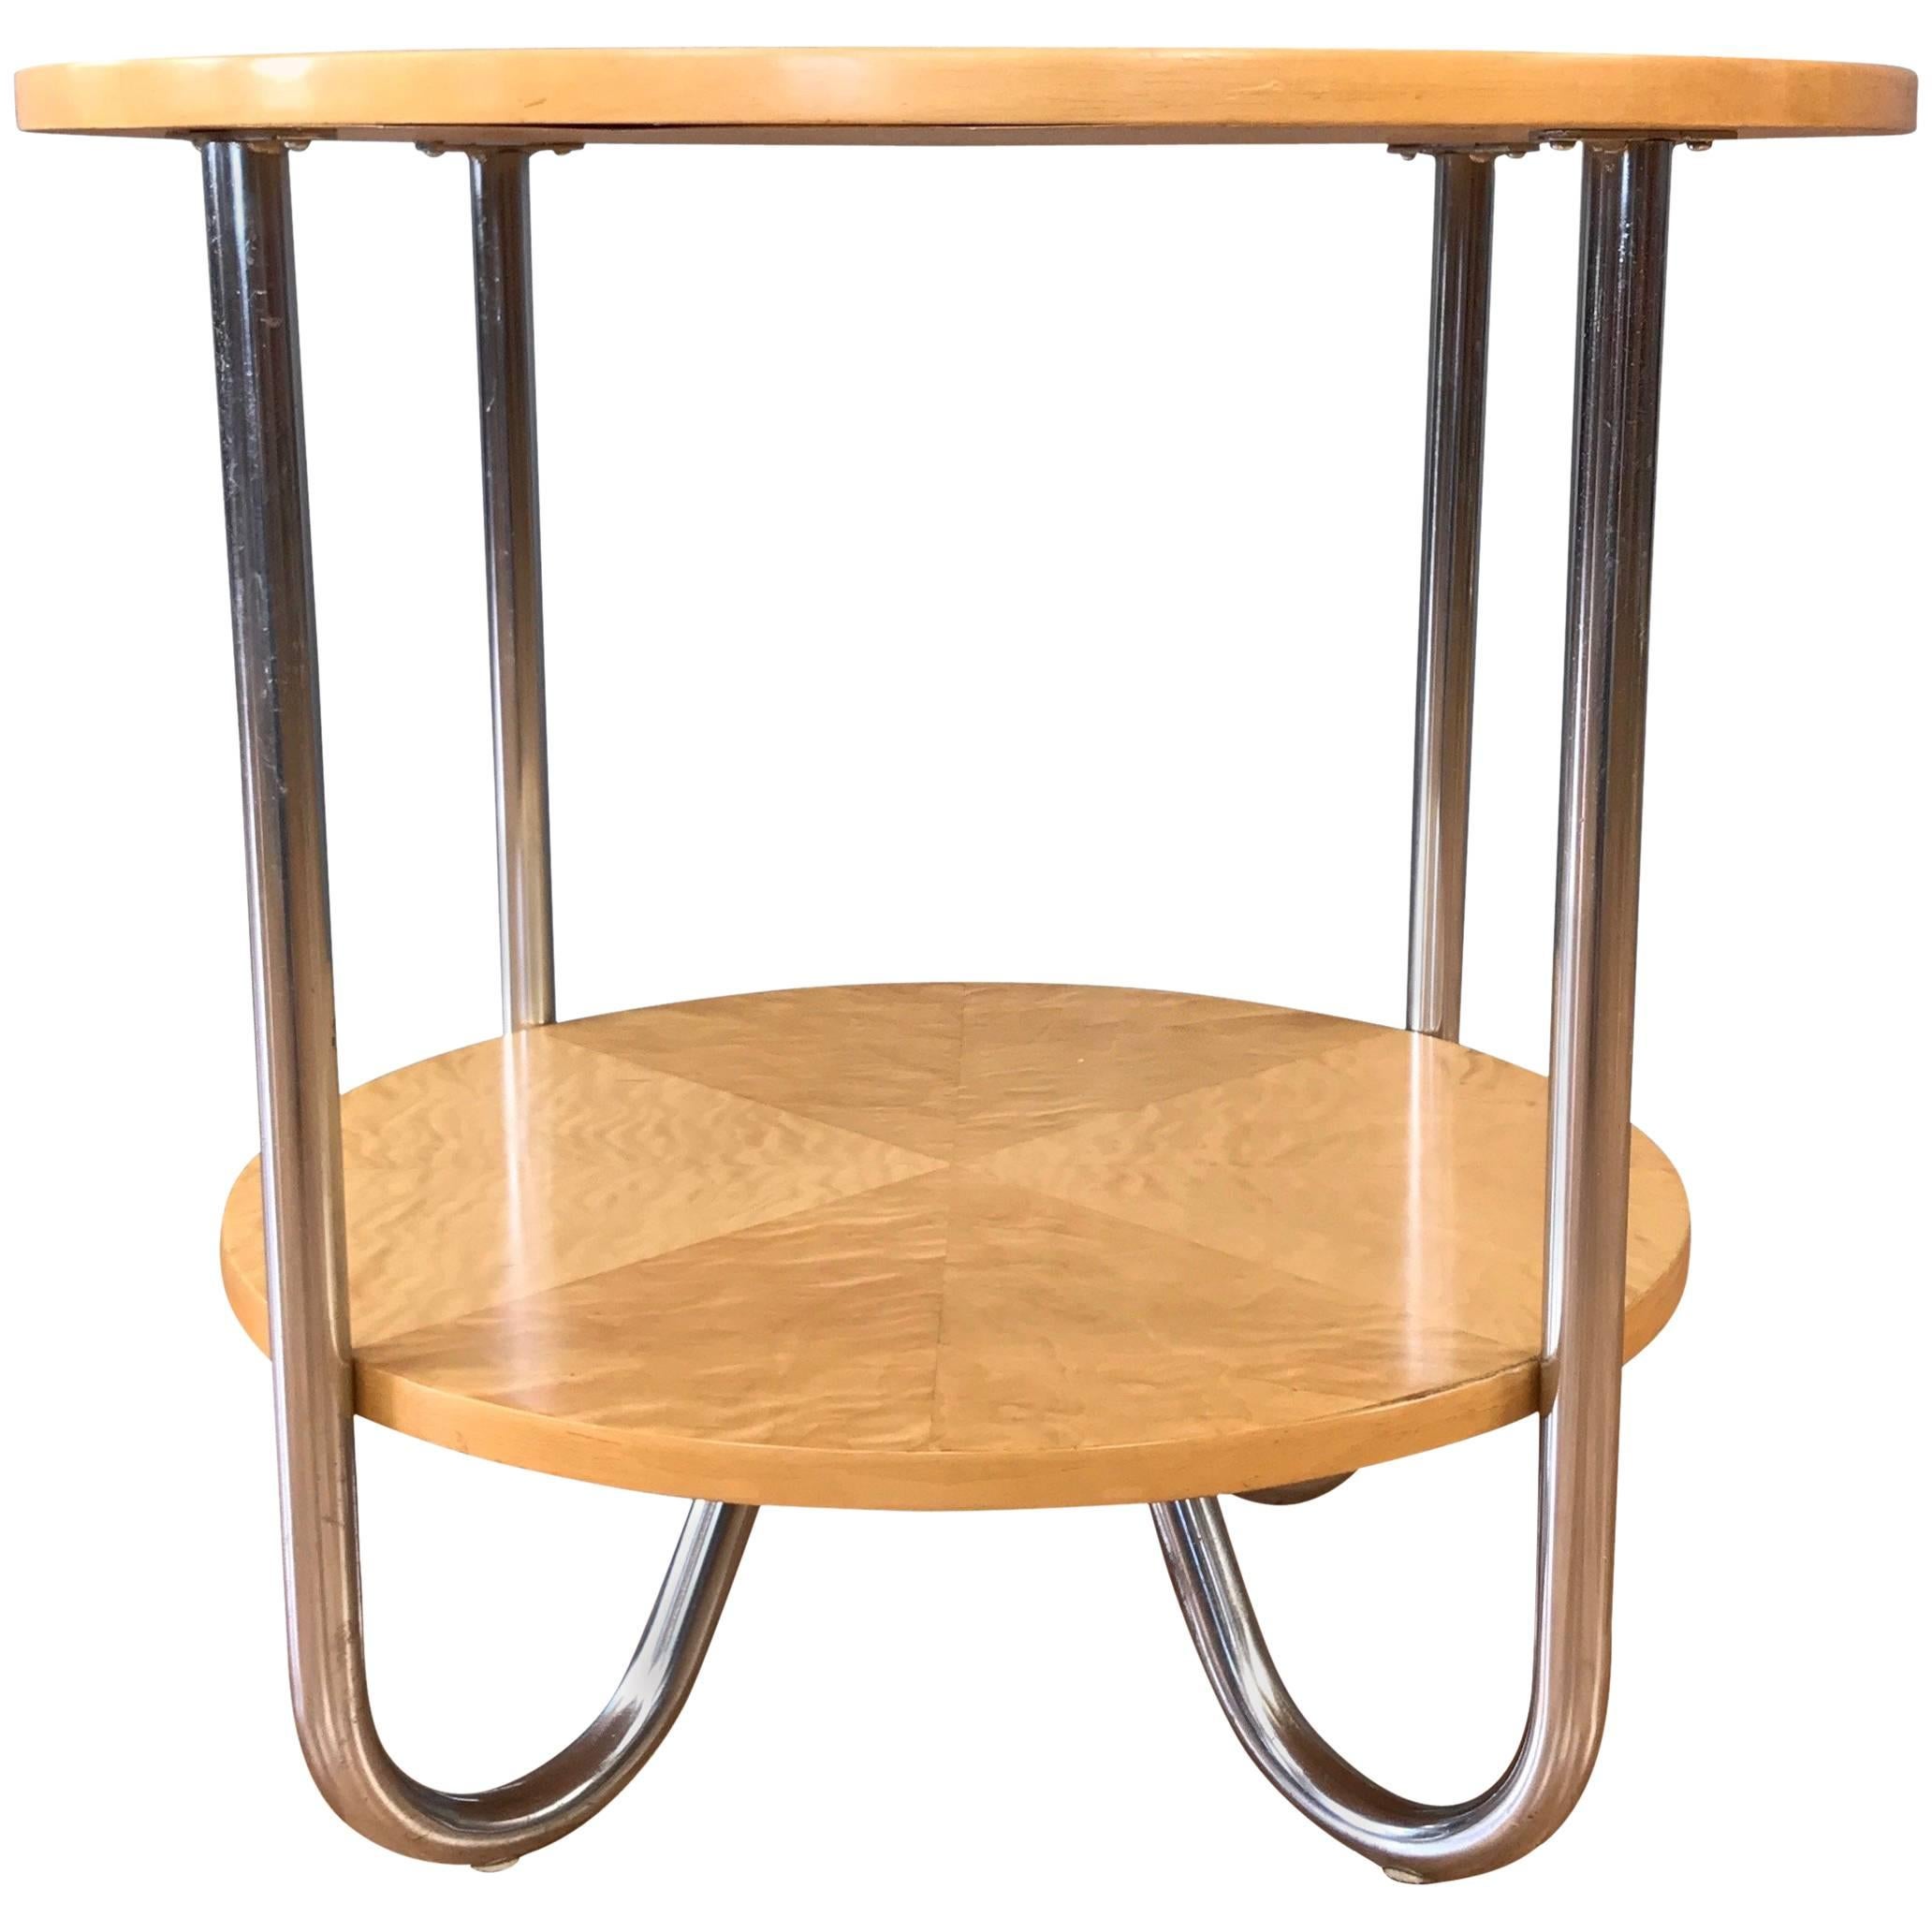 Two-Tier Maple Side Table Attributed to Wolfgang Hoffmann for Royal-Chrome